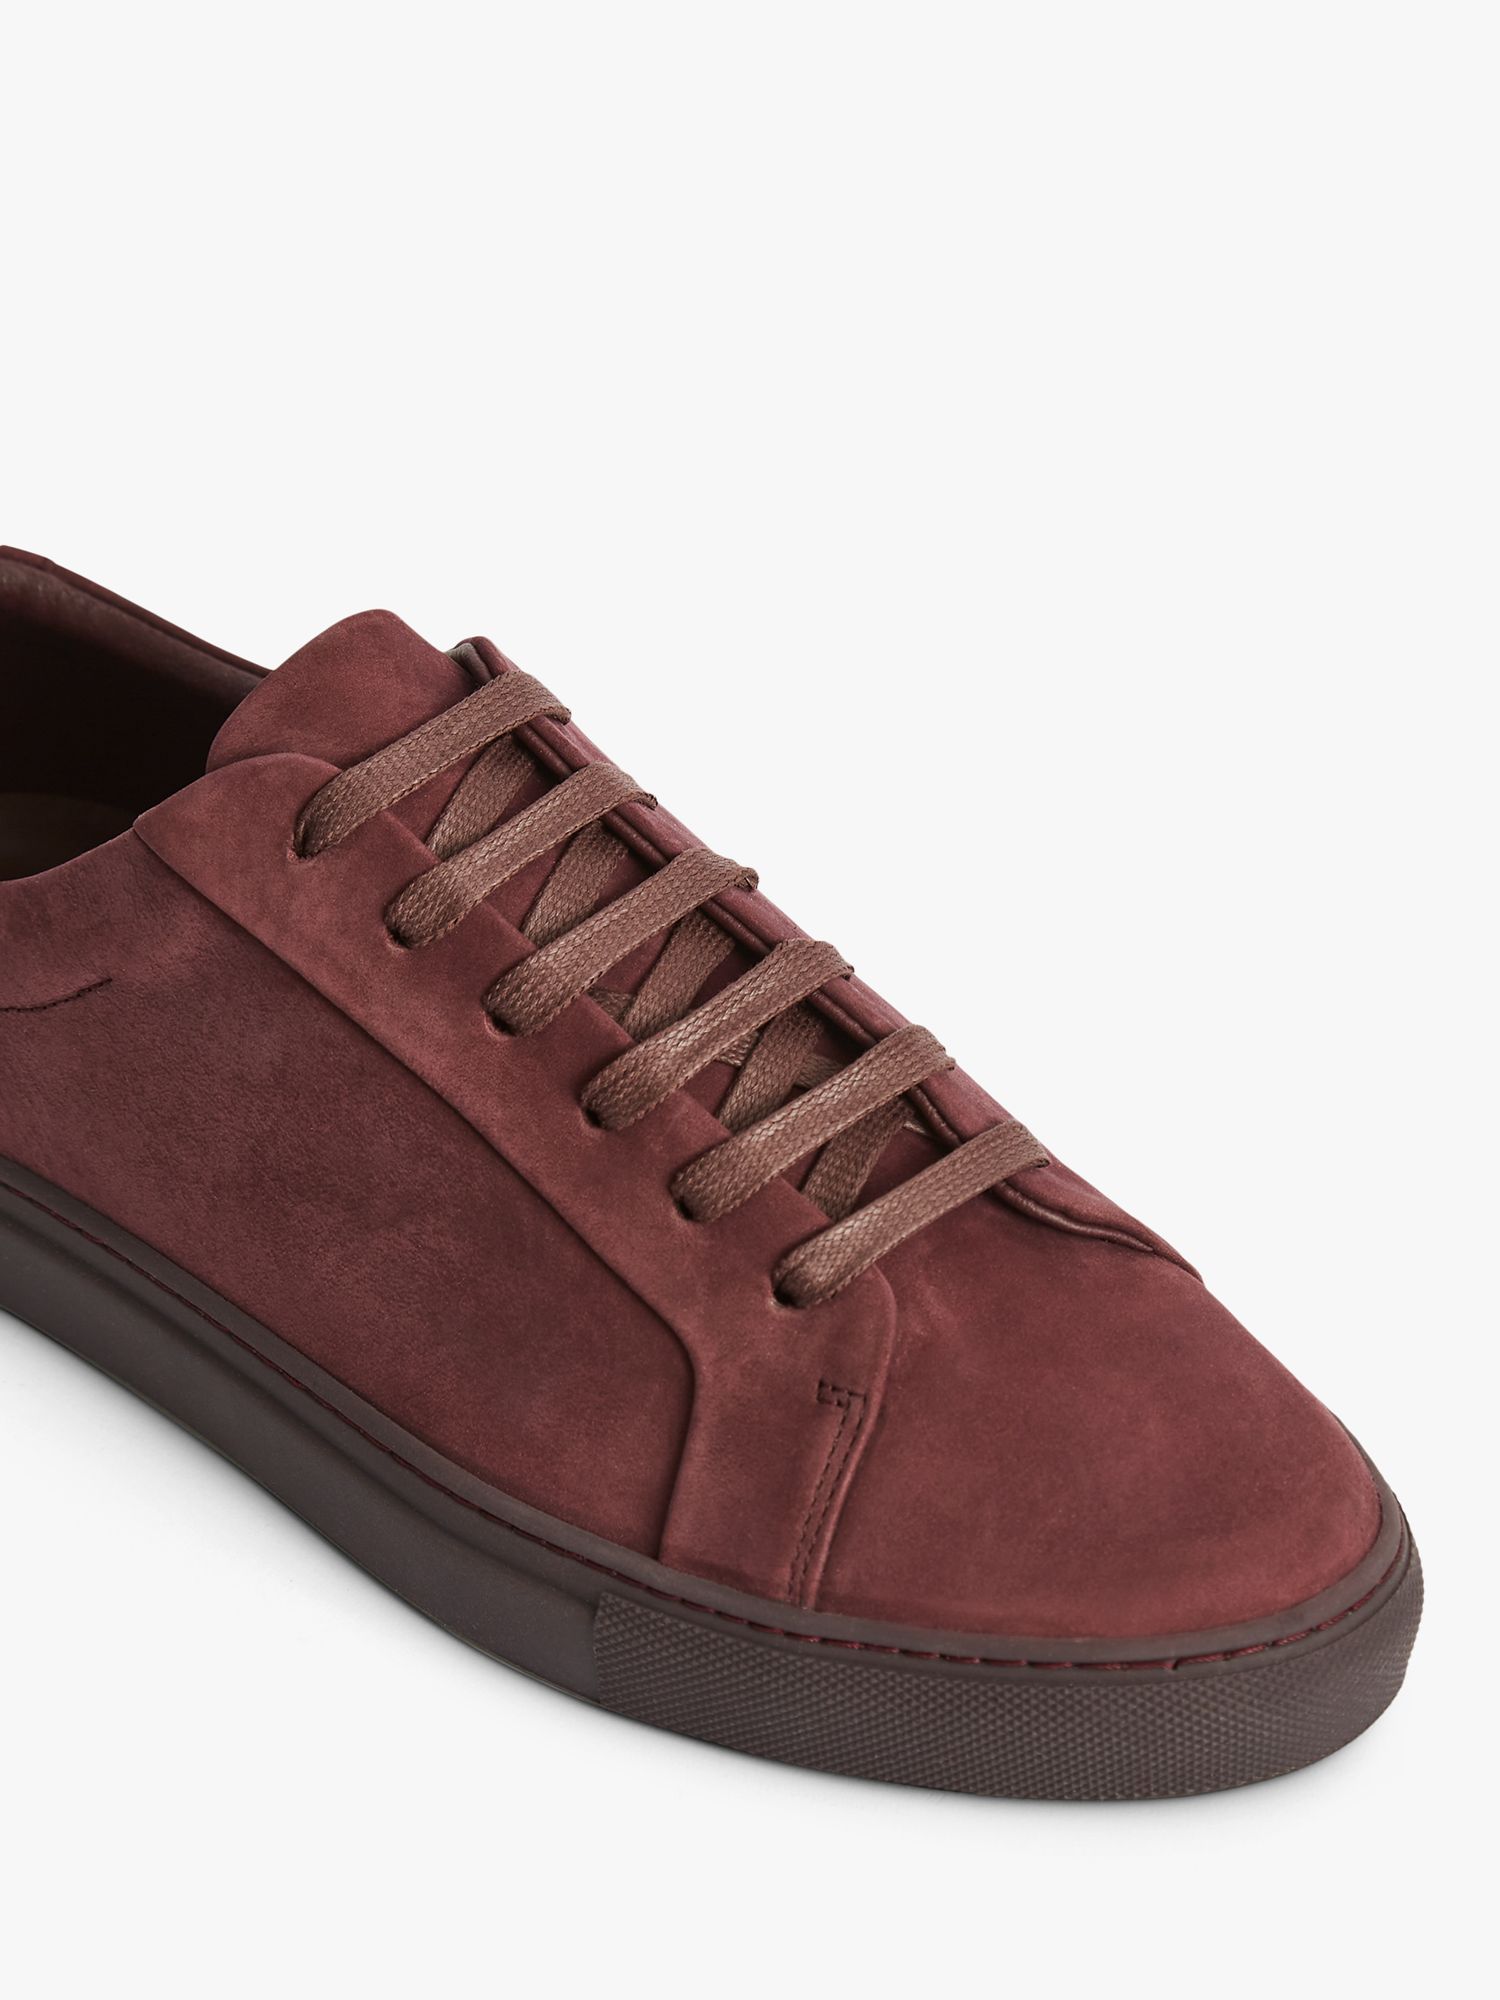 Reiss Luca Nubuck Leather Trainers, Bordeaux Red